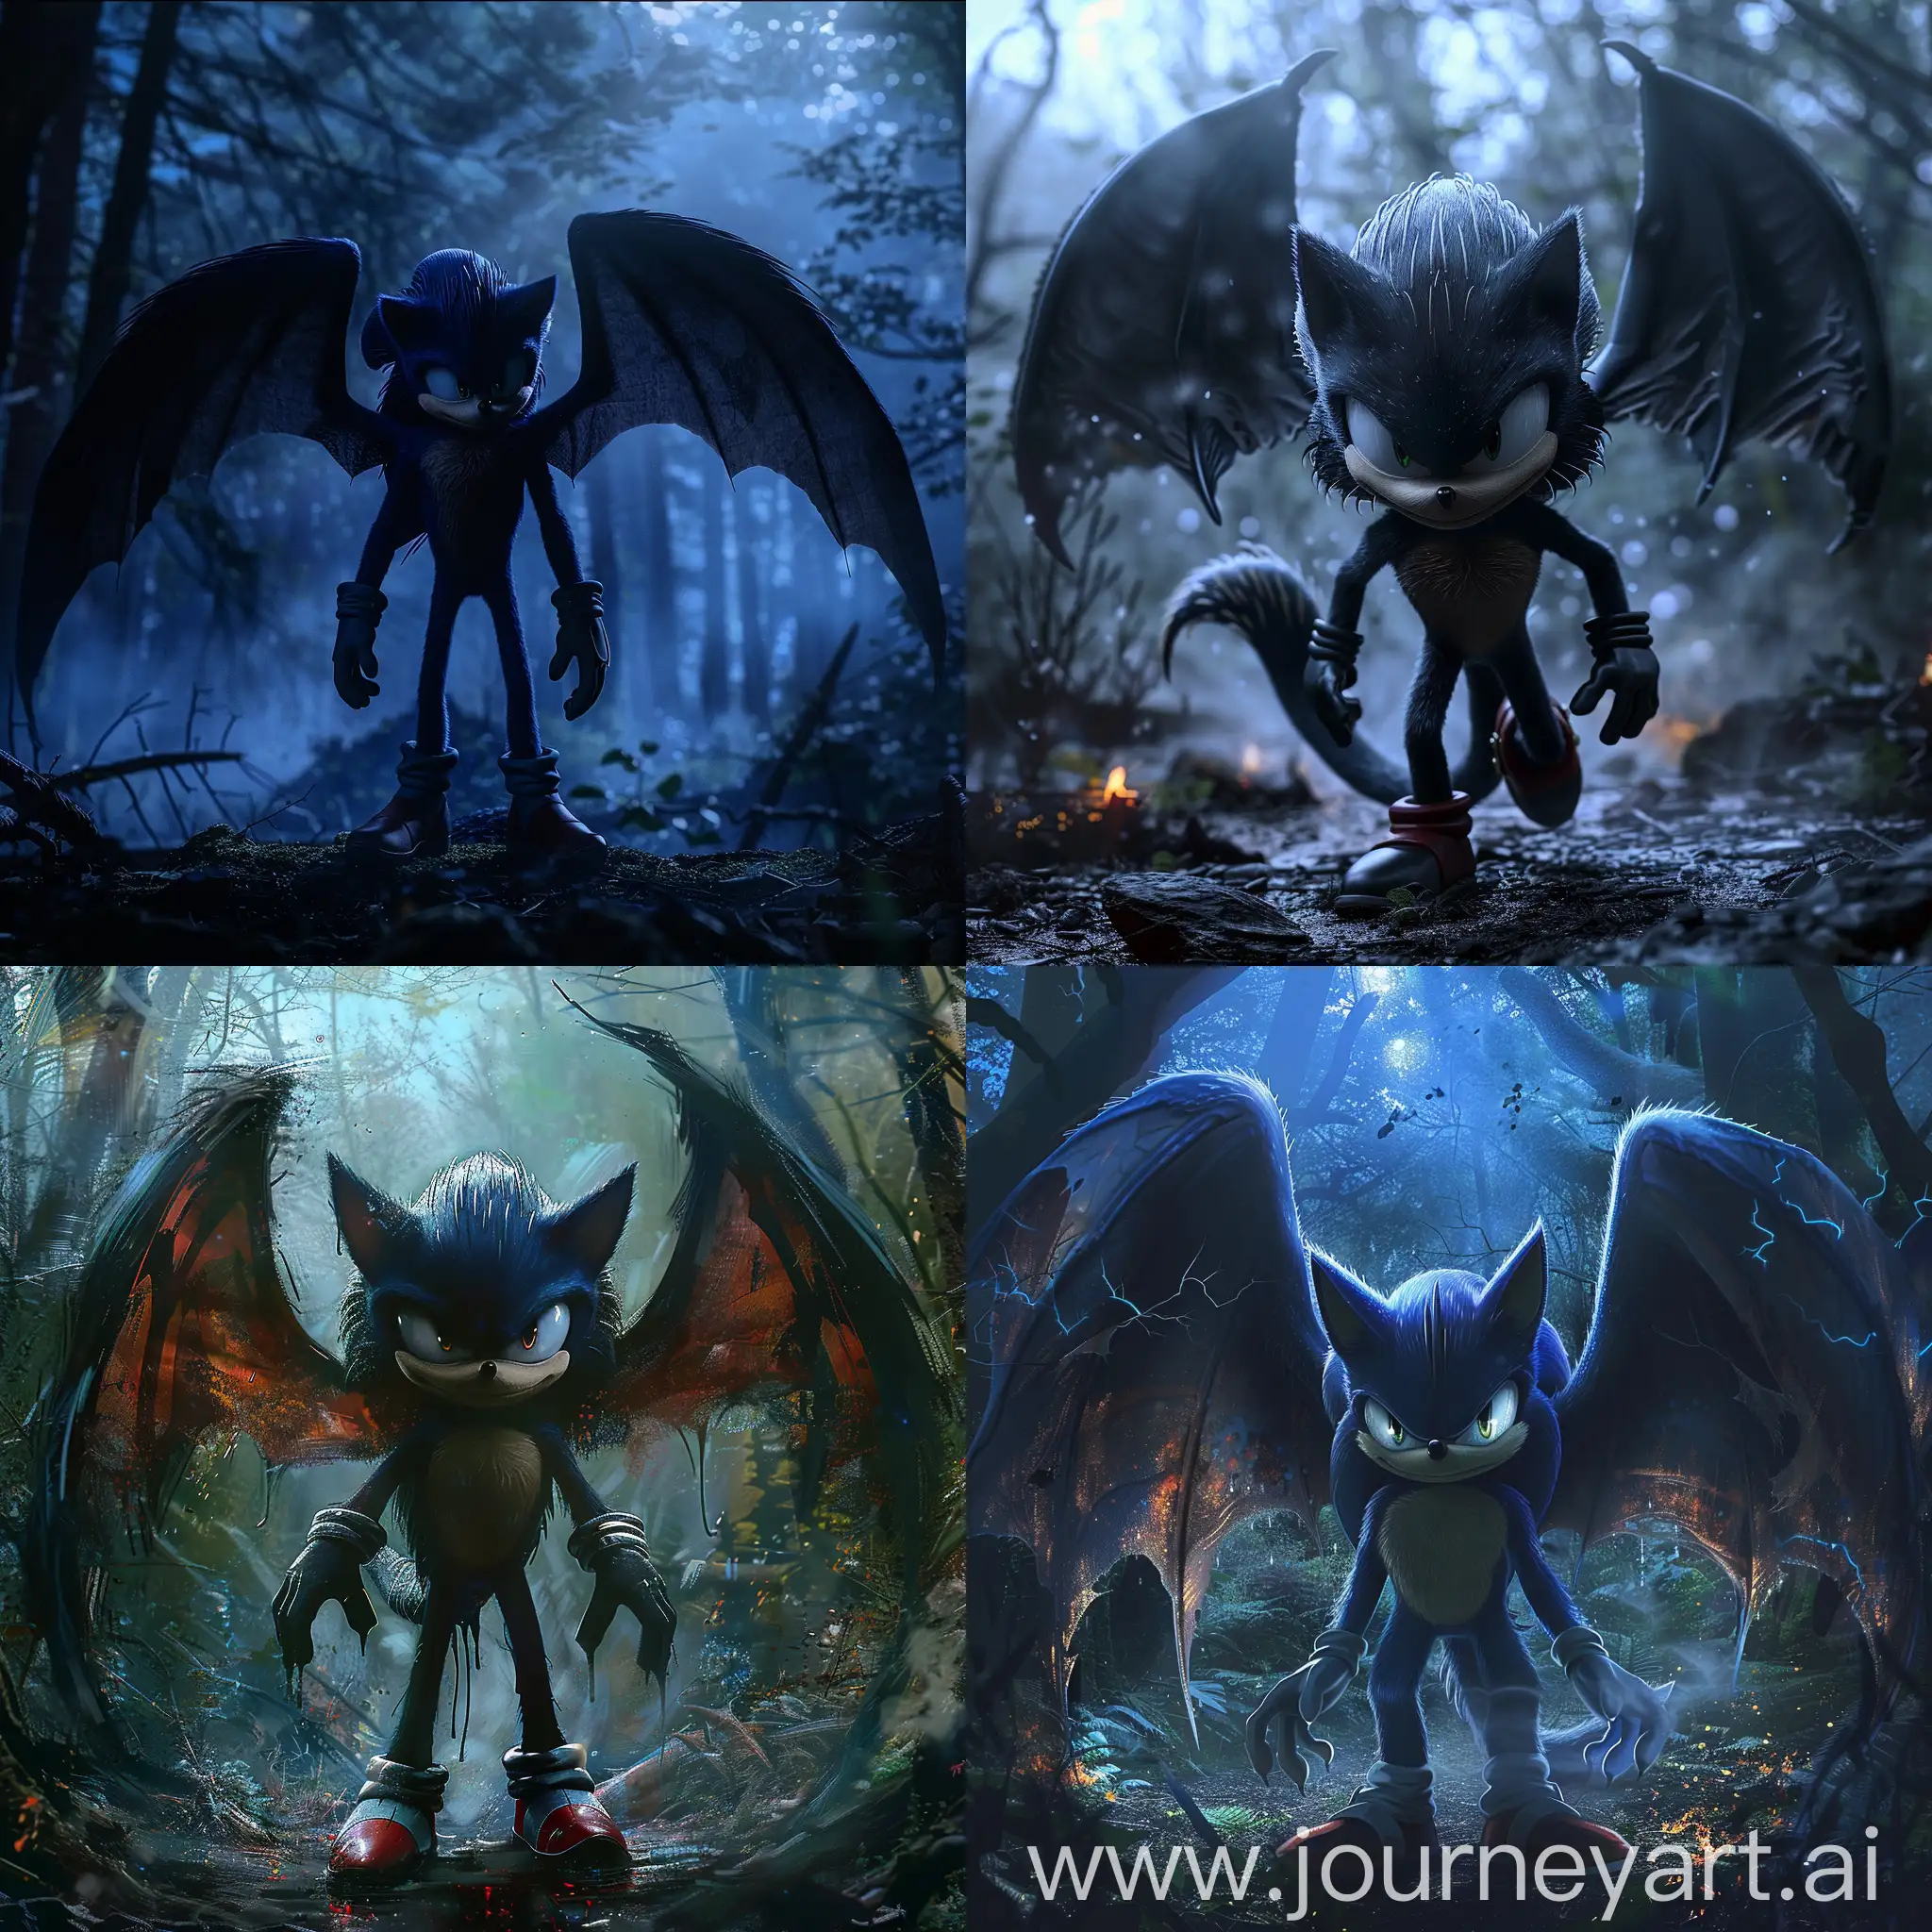 Sonic the hedgehog movie with dark dragon wings in the forest night